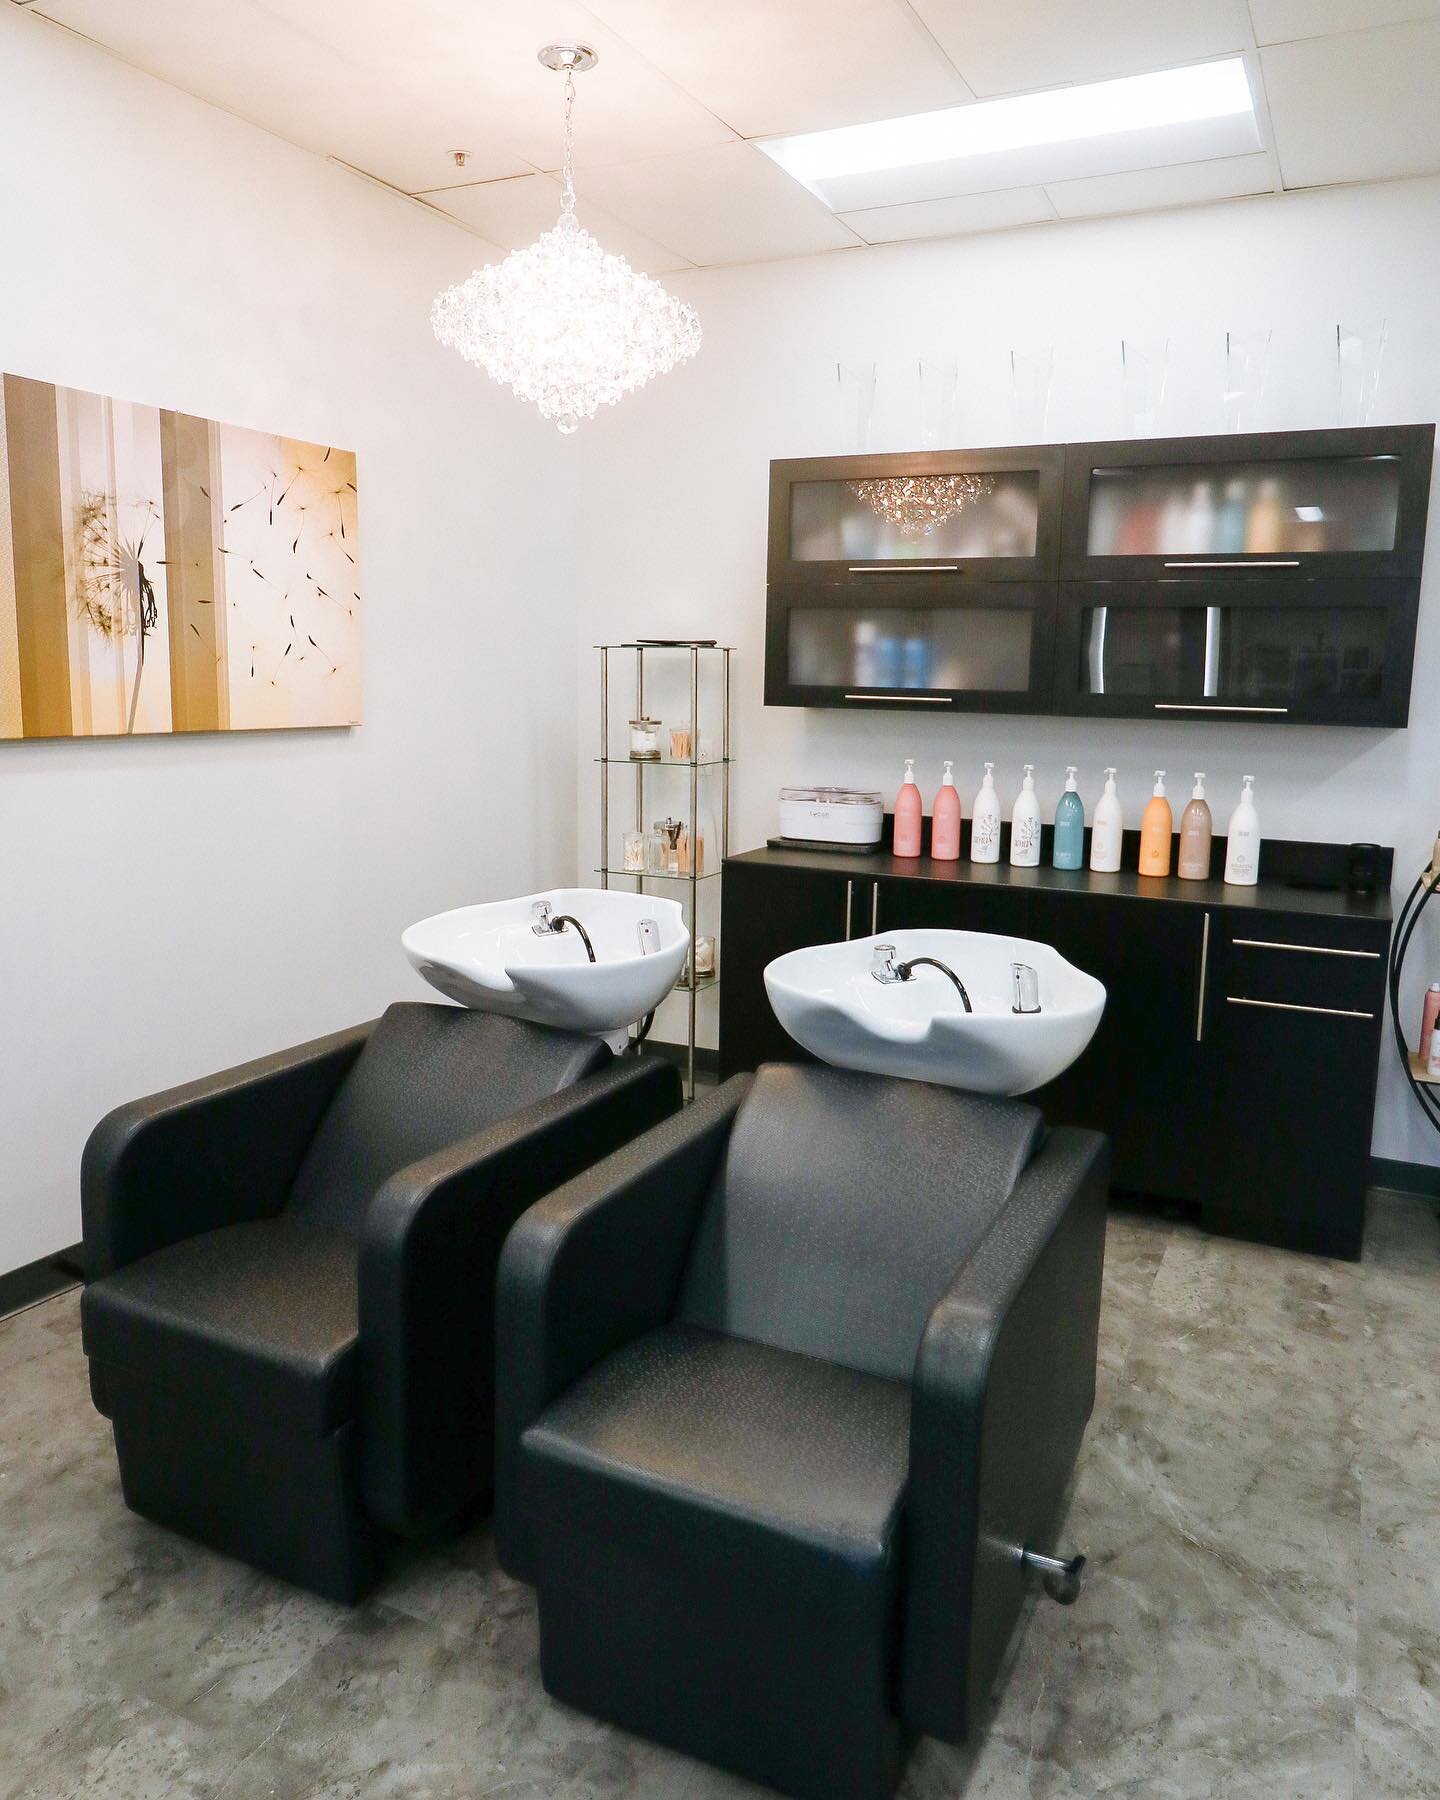 🌼 SALON&nbsp;REVEAL 🌼
Becki's salon remodel is a dream come true!&nbsp;@salon_ciry
.
Becki, a dear friend, neighbor, and client, wanted to simplify her life and move her second generation salon closer to home. She decided to invest in the building 